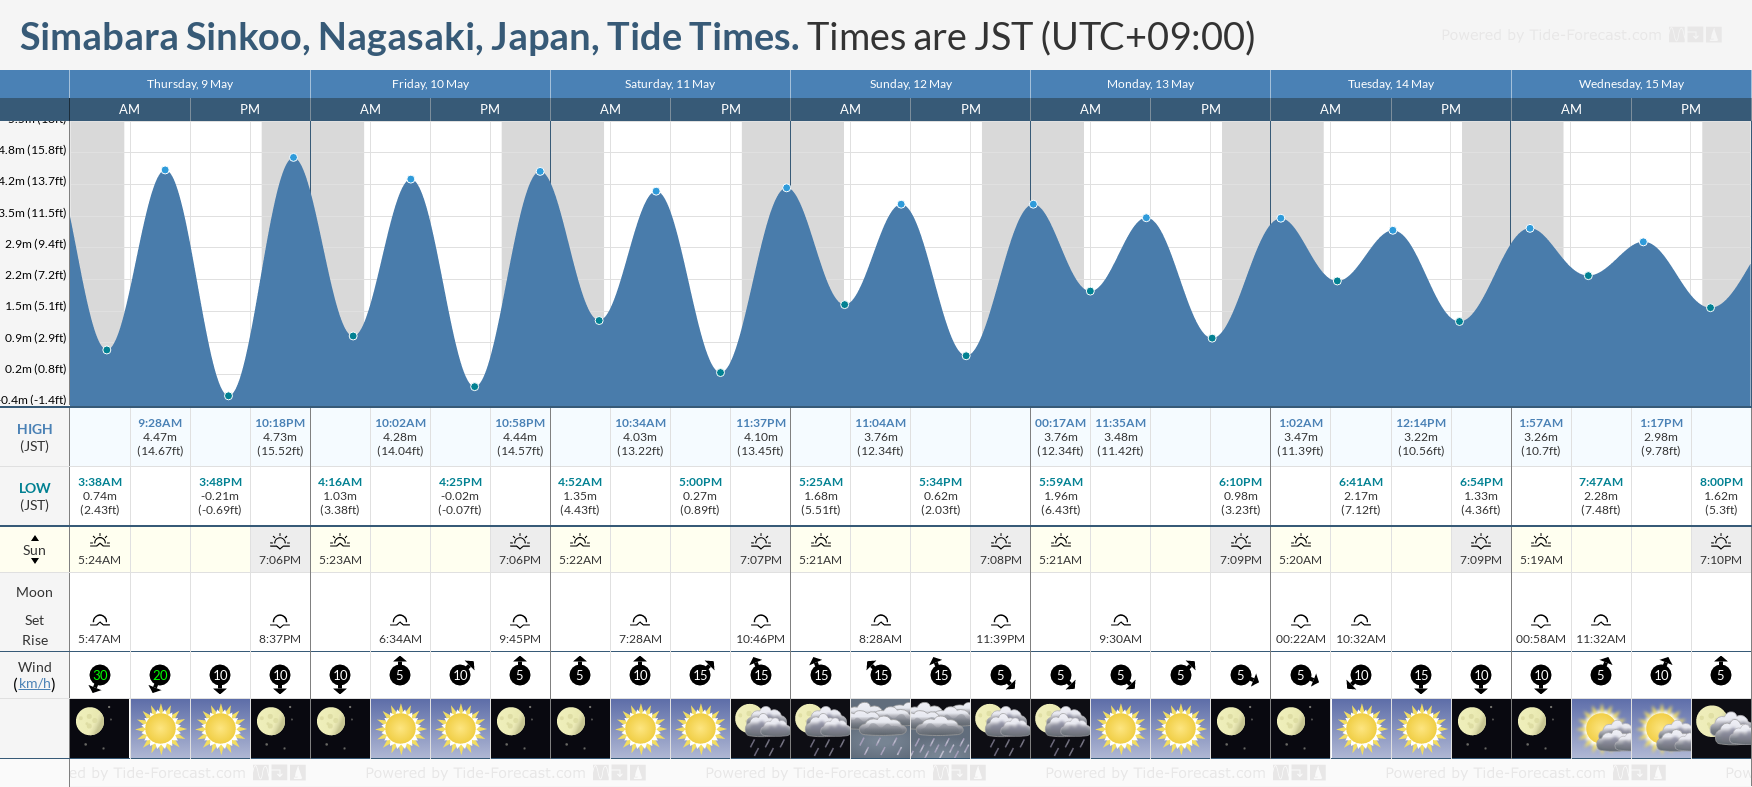 Simabara Sinkoo, Nagasaki, Japan Tide Chart including high and low tide tide times for the next 7 days